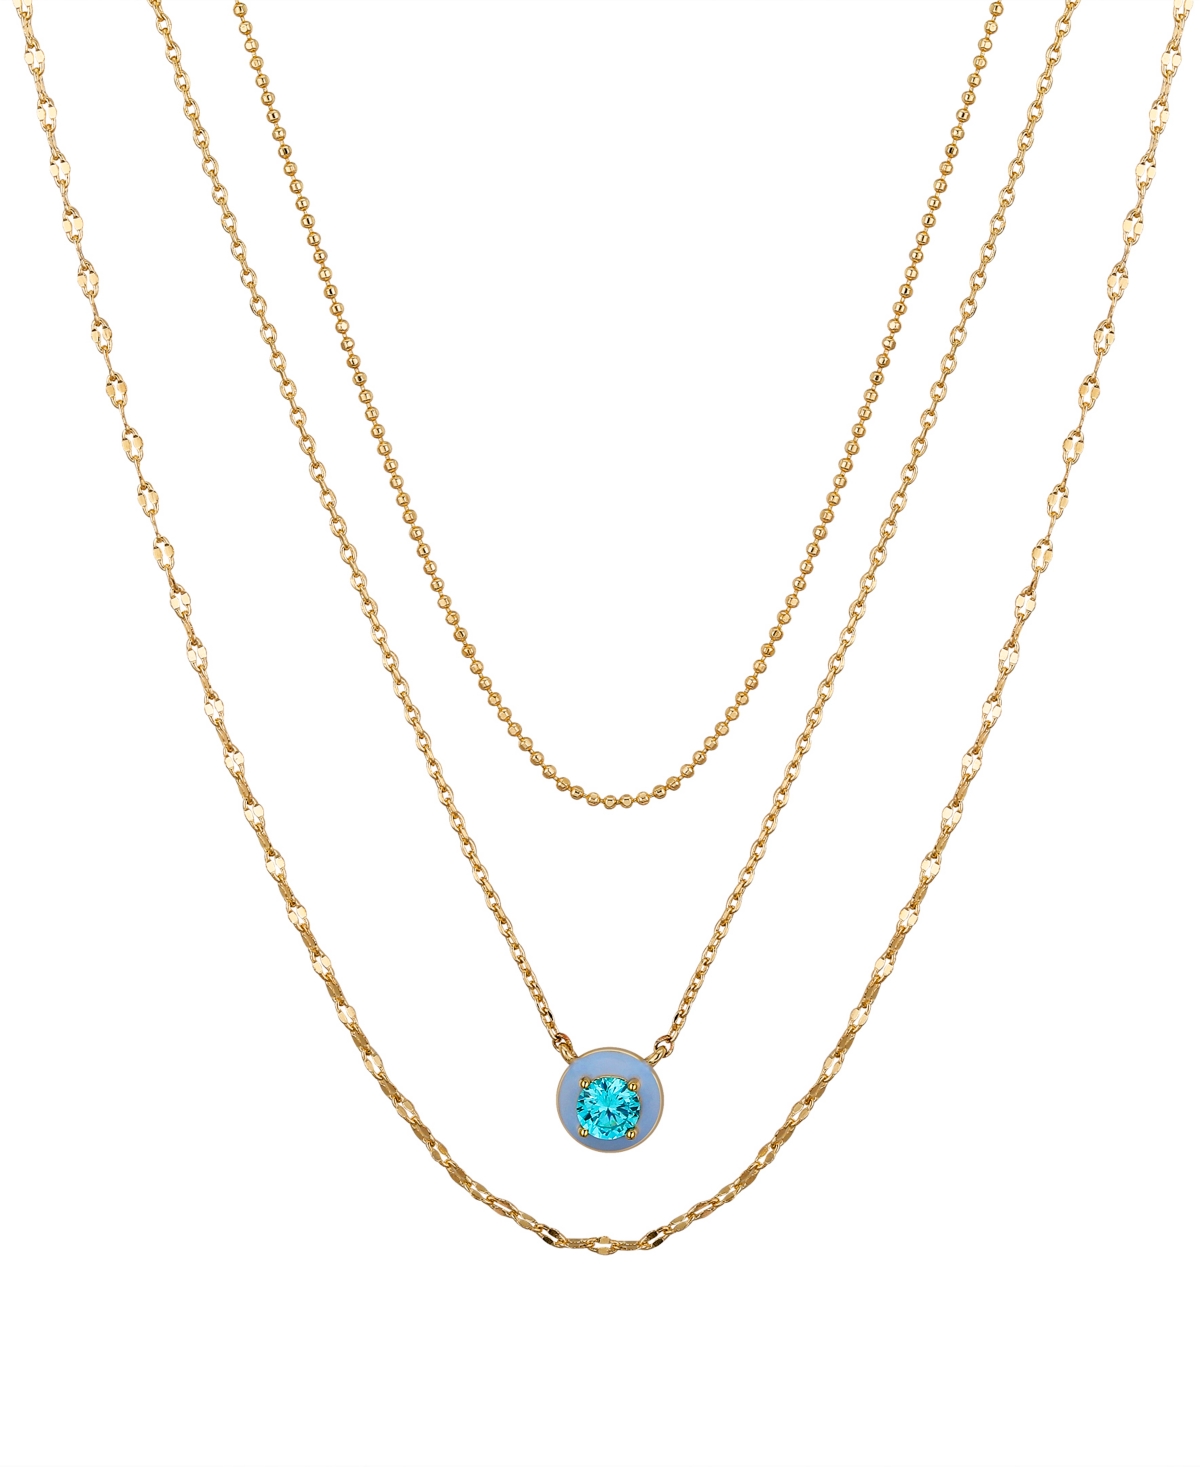 Unwritten Blue Cubic Zirconia And Blue Enamel Pendant Layered Necklace Set In Gold